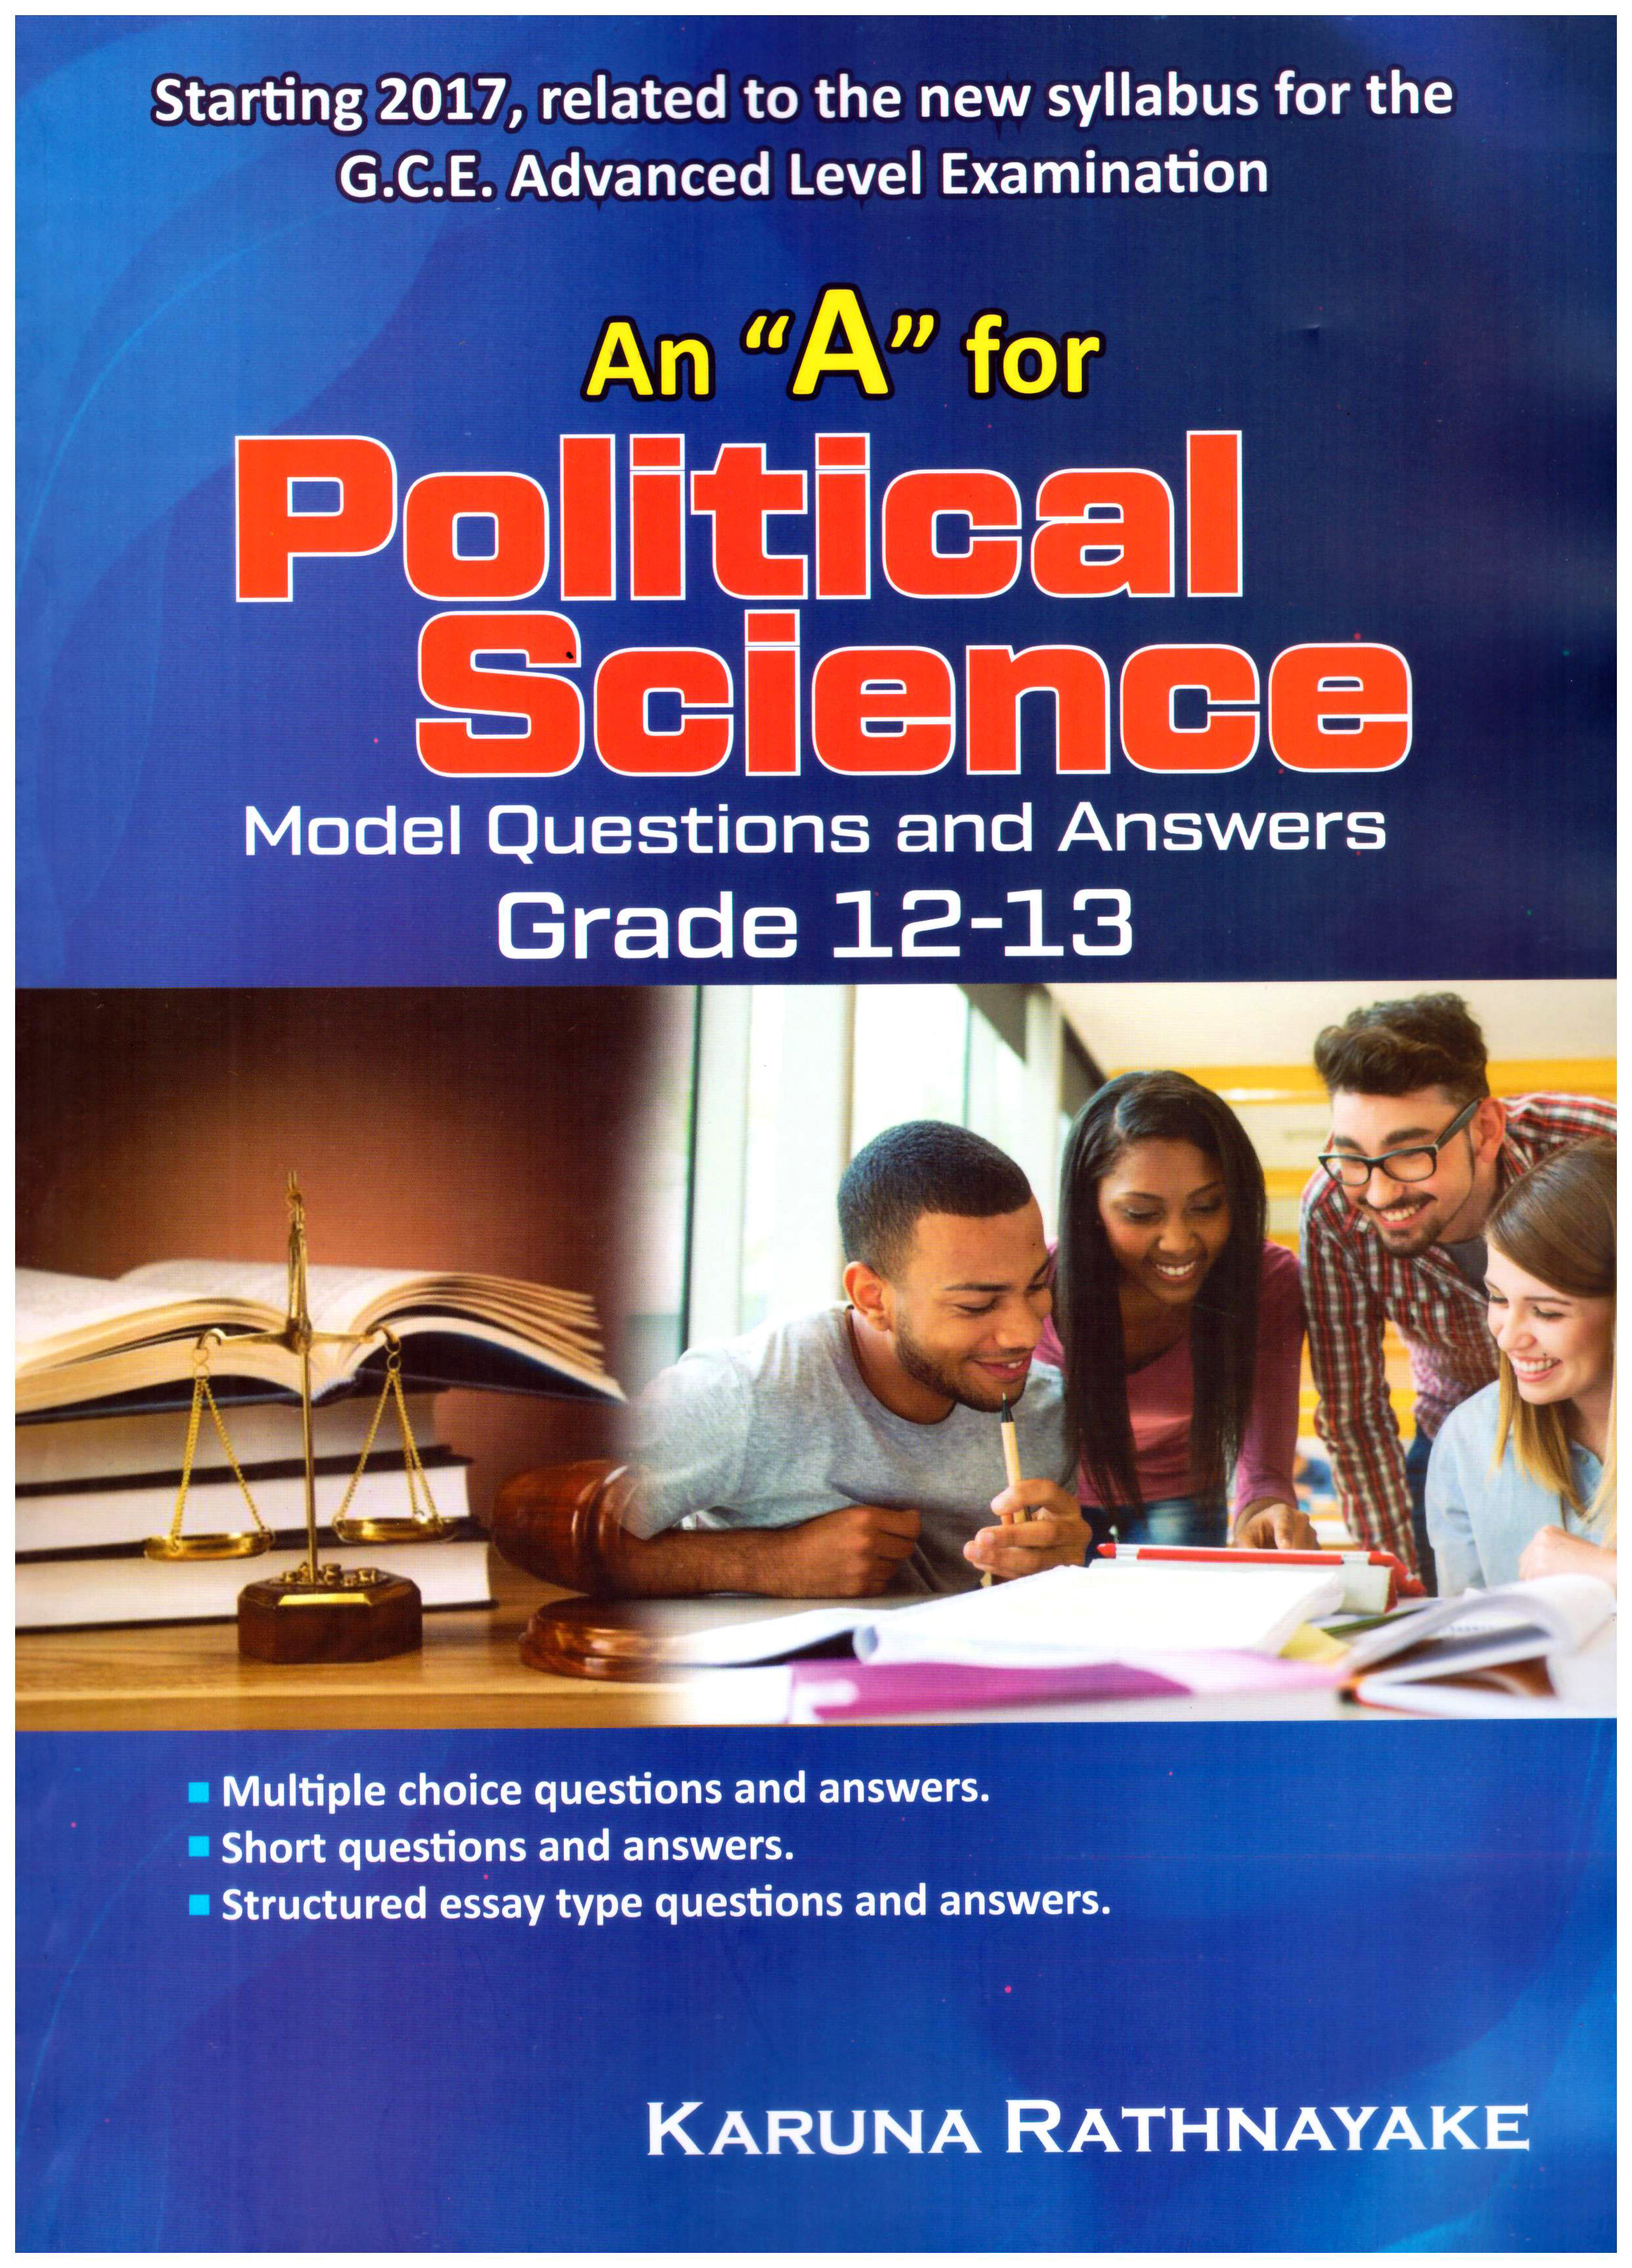 An 'A' for Political Science Model Questions and Answers Grade 12-13